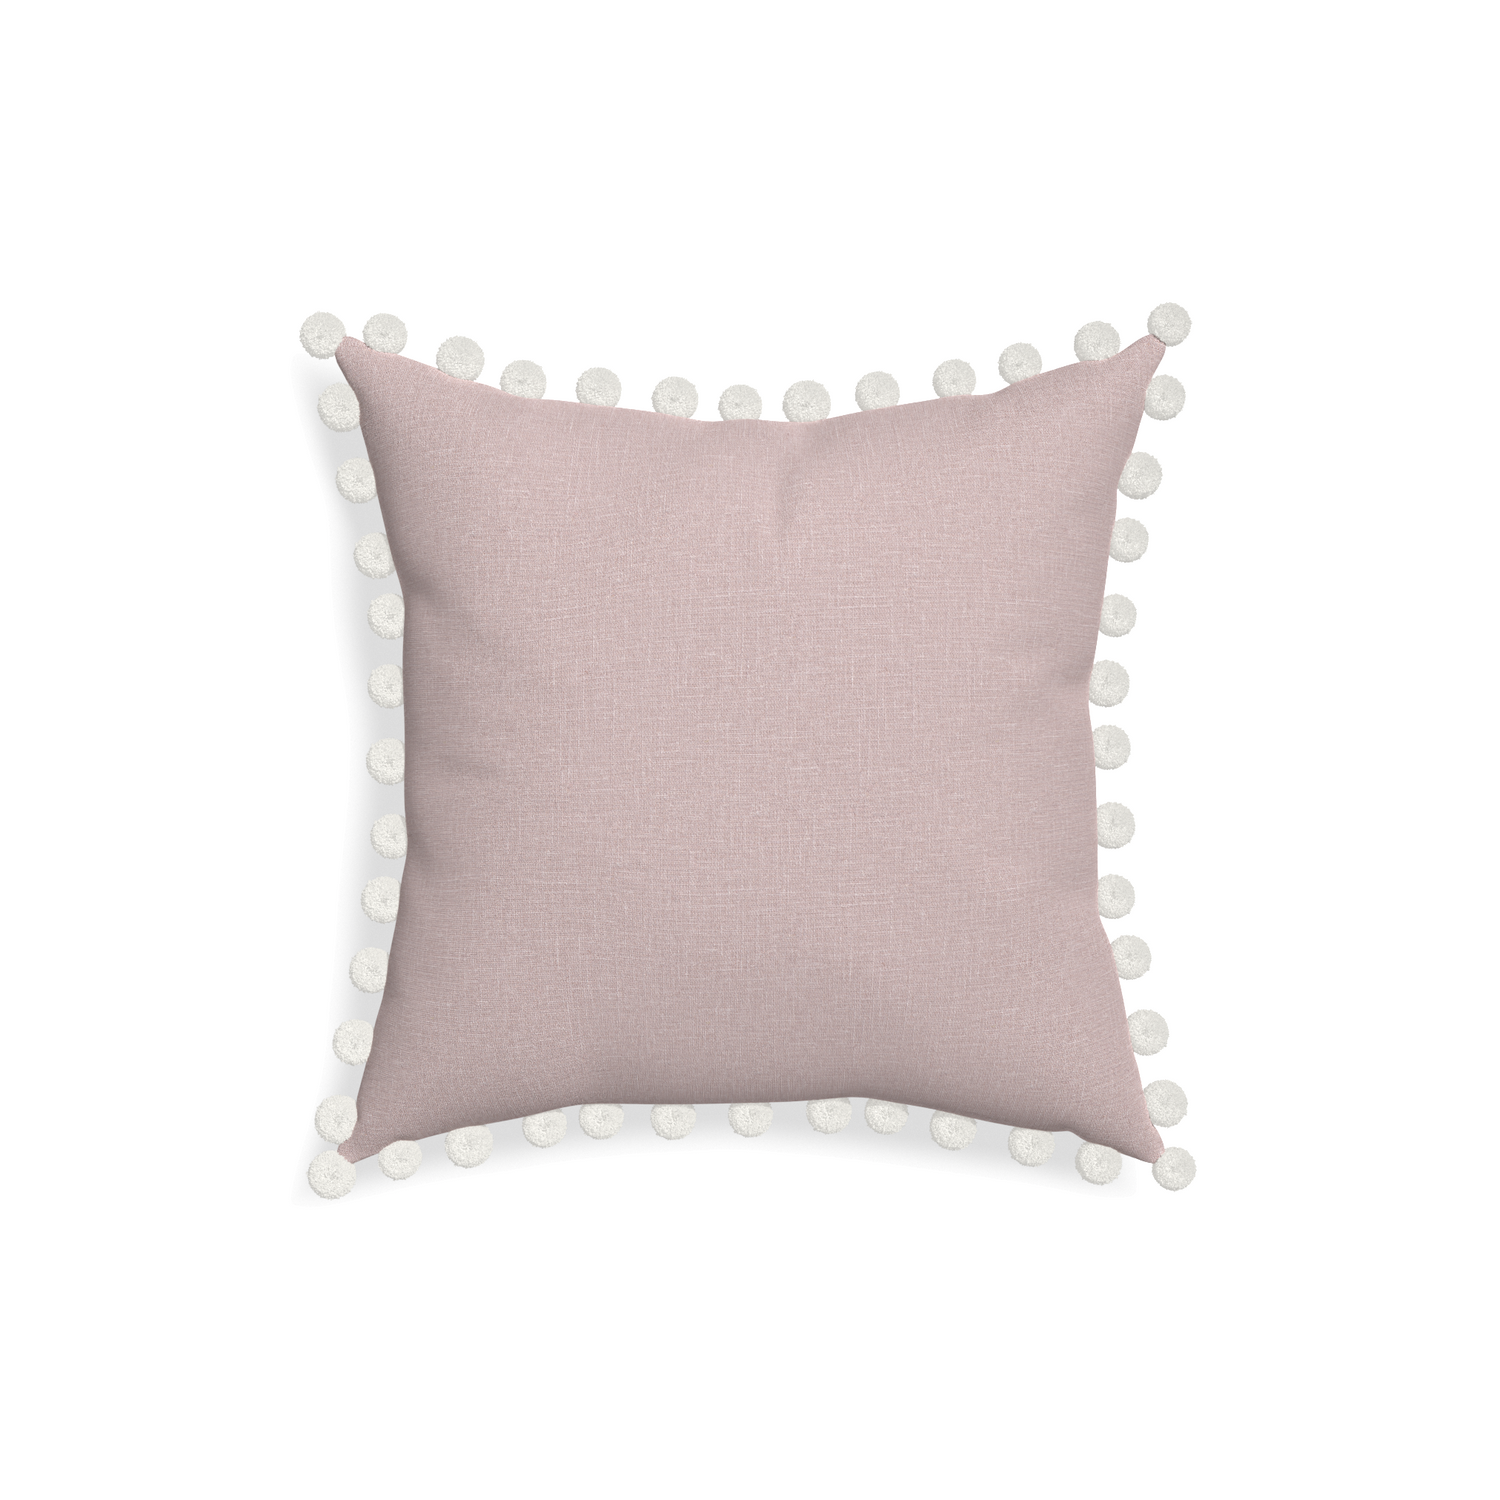 18-square orchid custom mauve pinkpillow with snow pom pom on white background